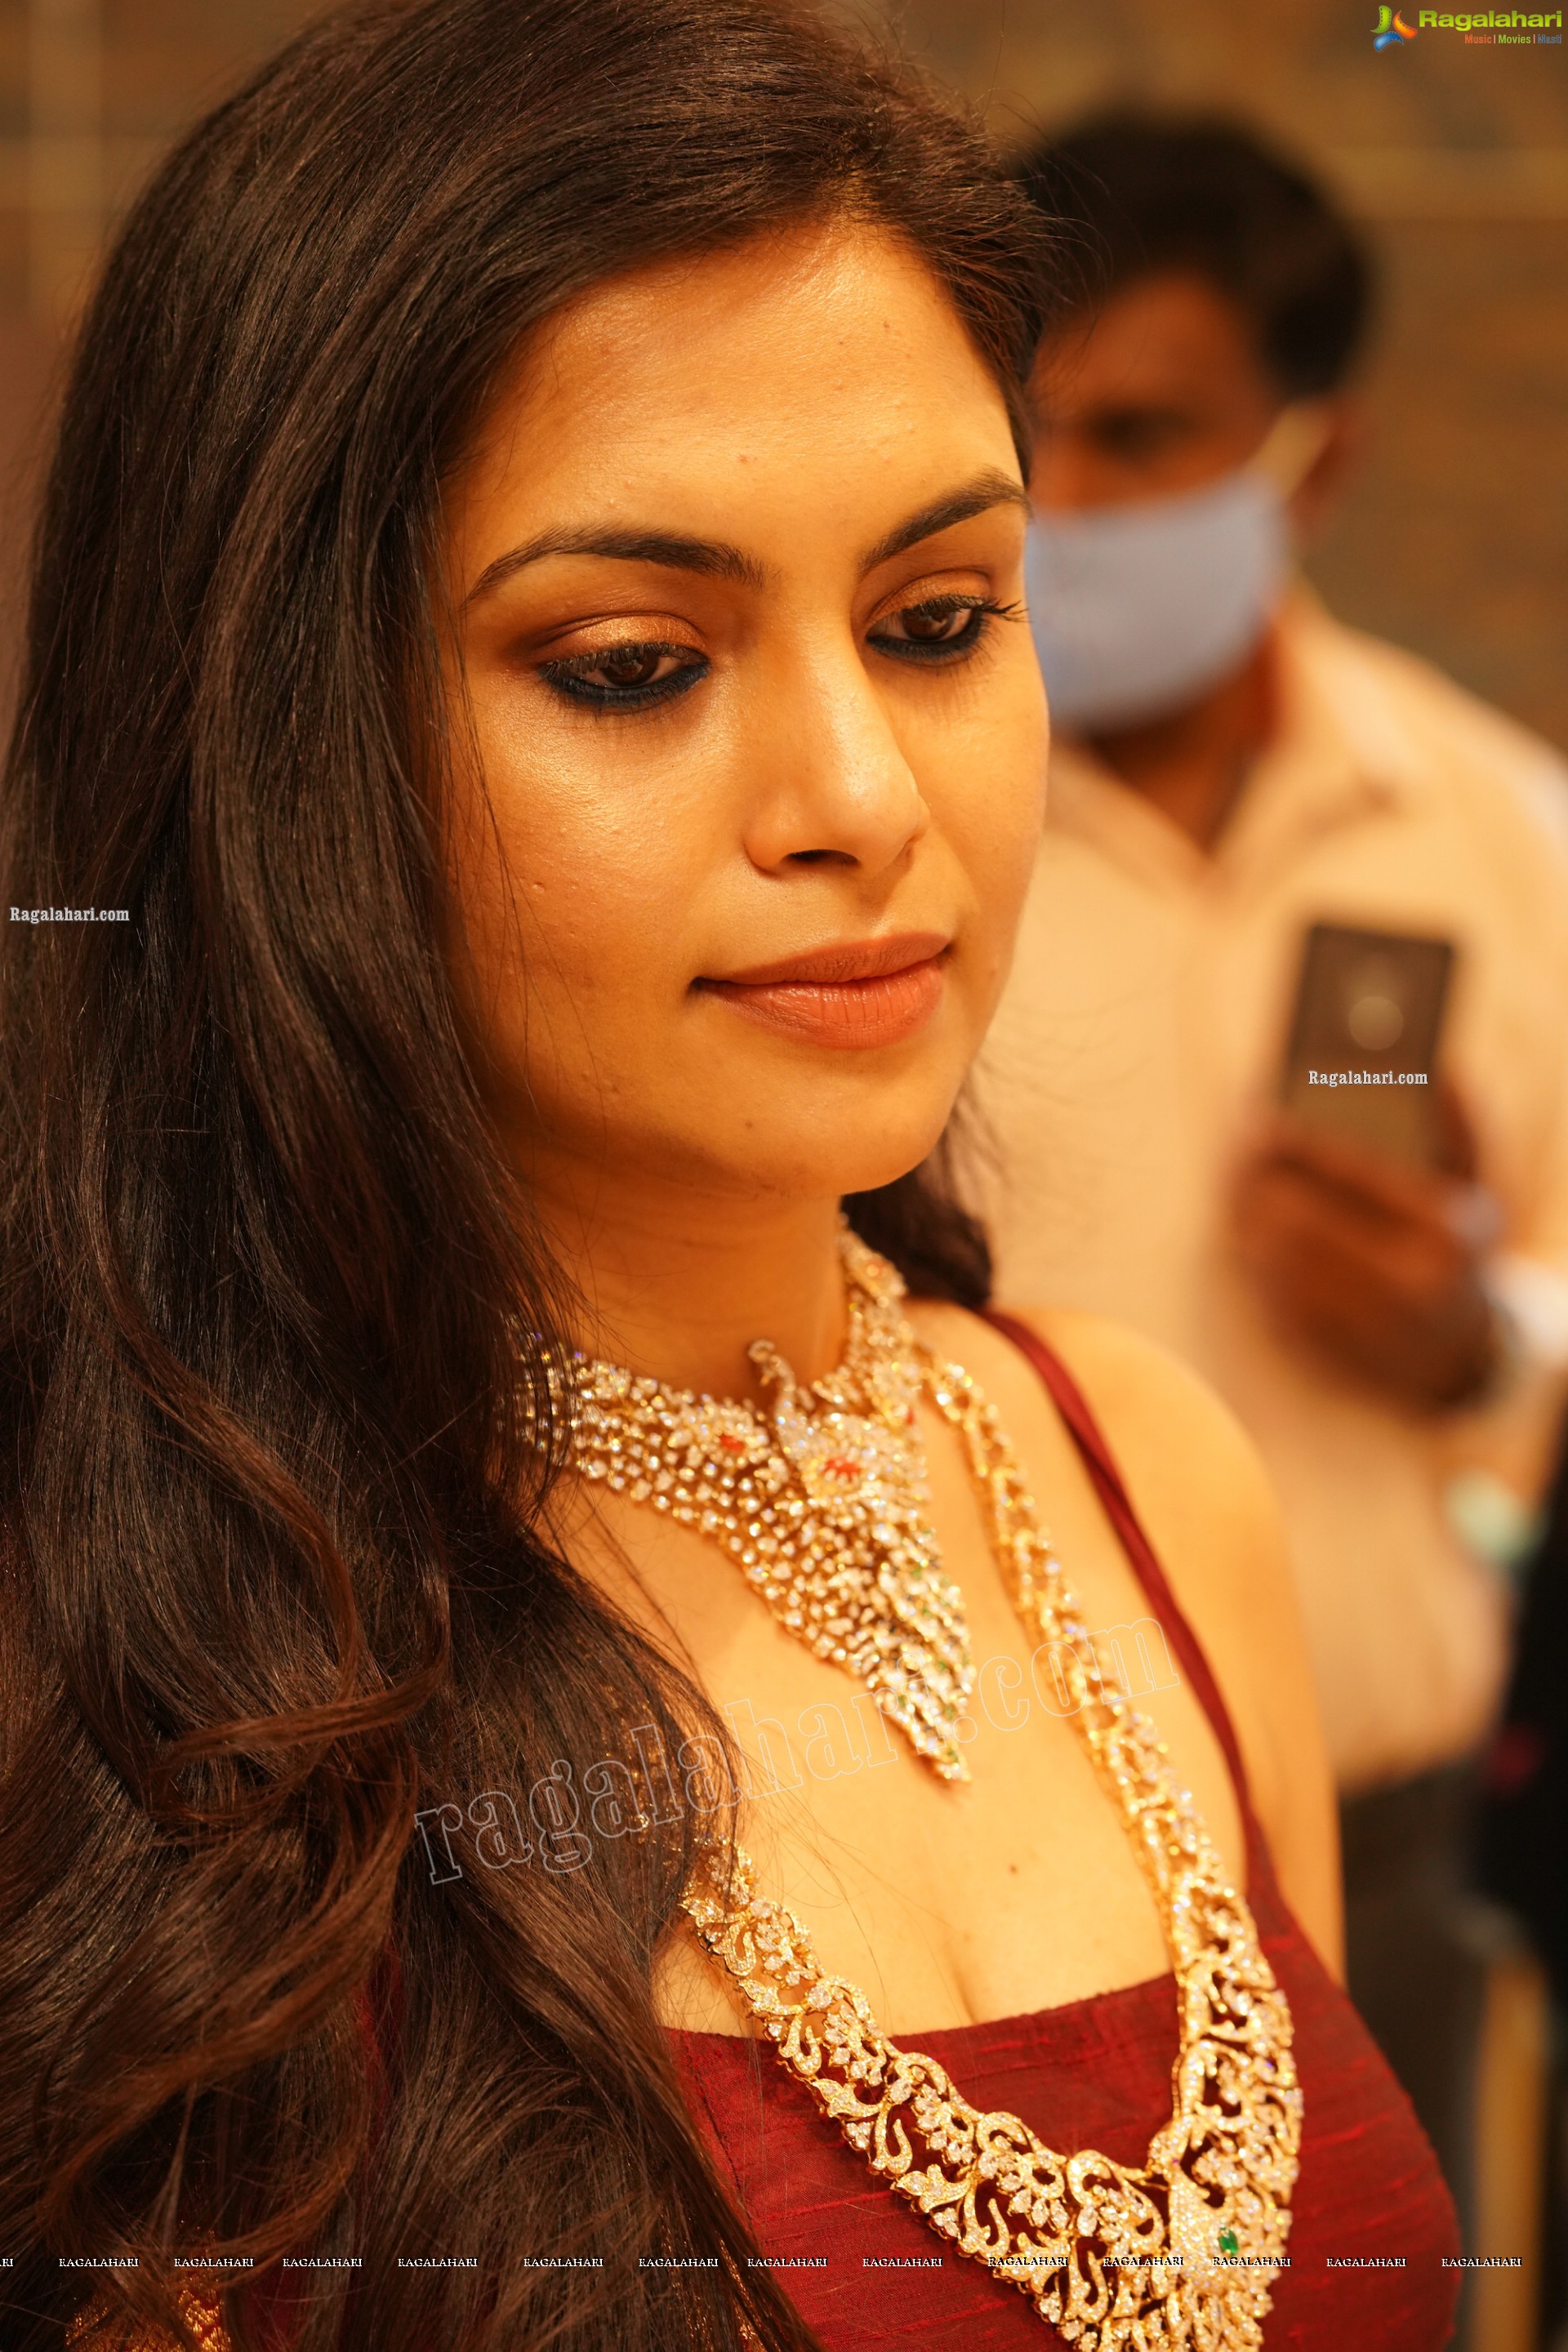 Sonu Gowda at Kirtilals Trunk Show at The Jayanthi Ballal Store Mysore, HD Photo Gallery